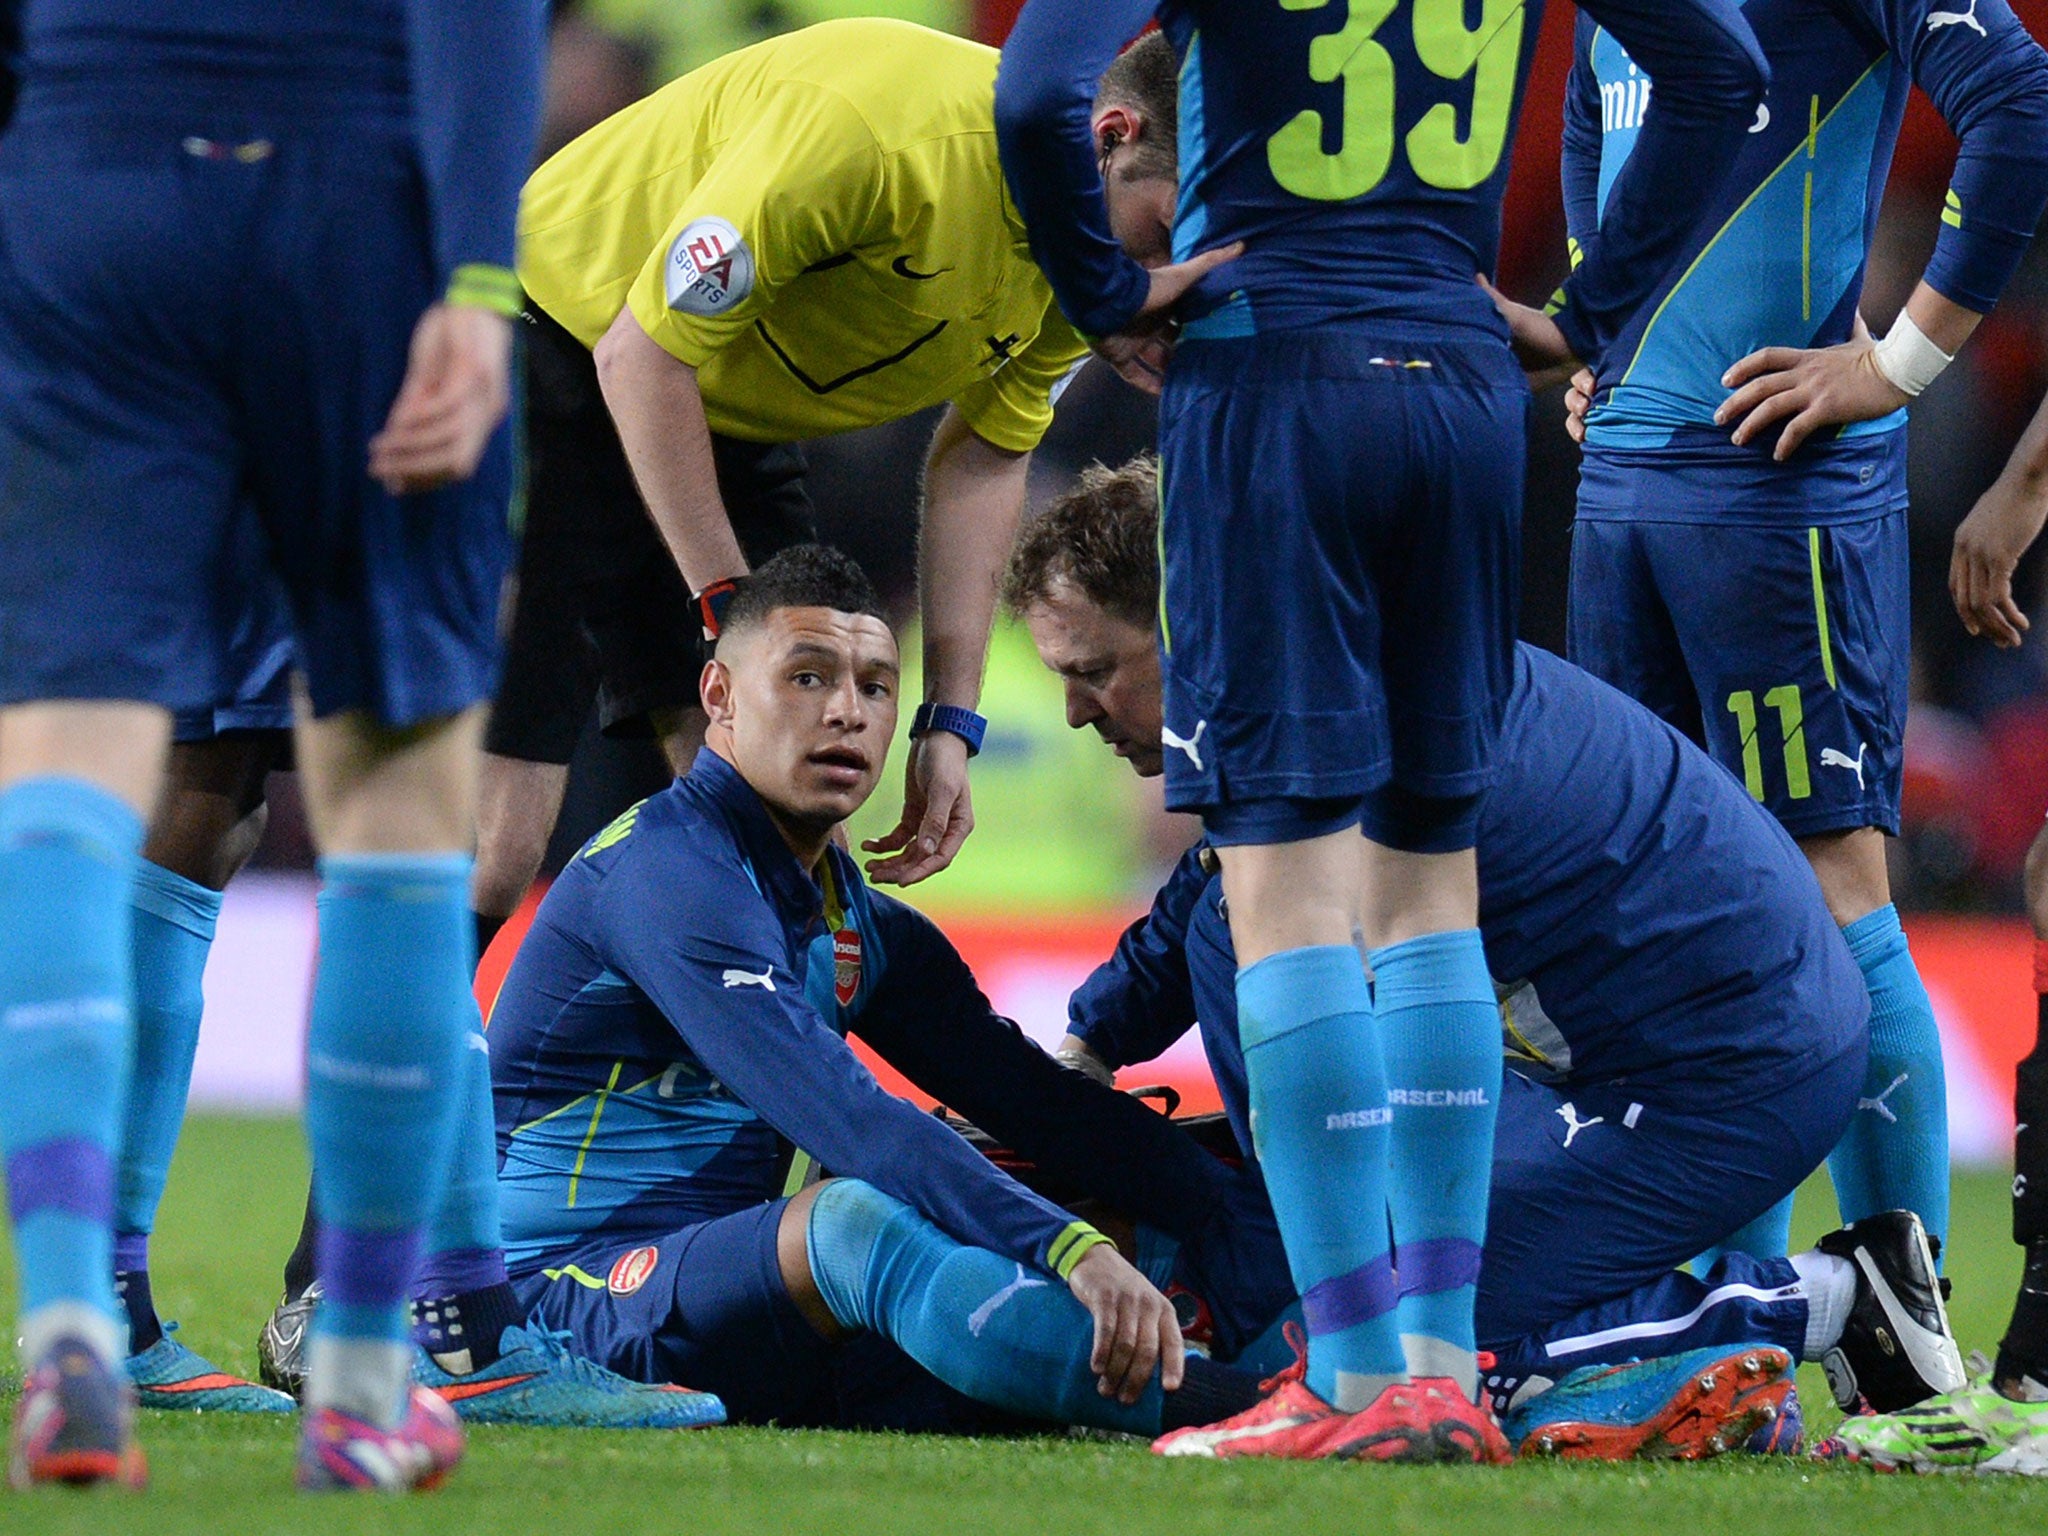 Alex Oxlade-Chamberlain injured his groin against Manchester United